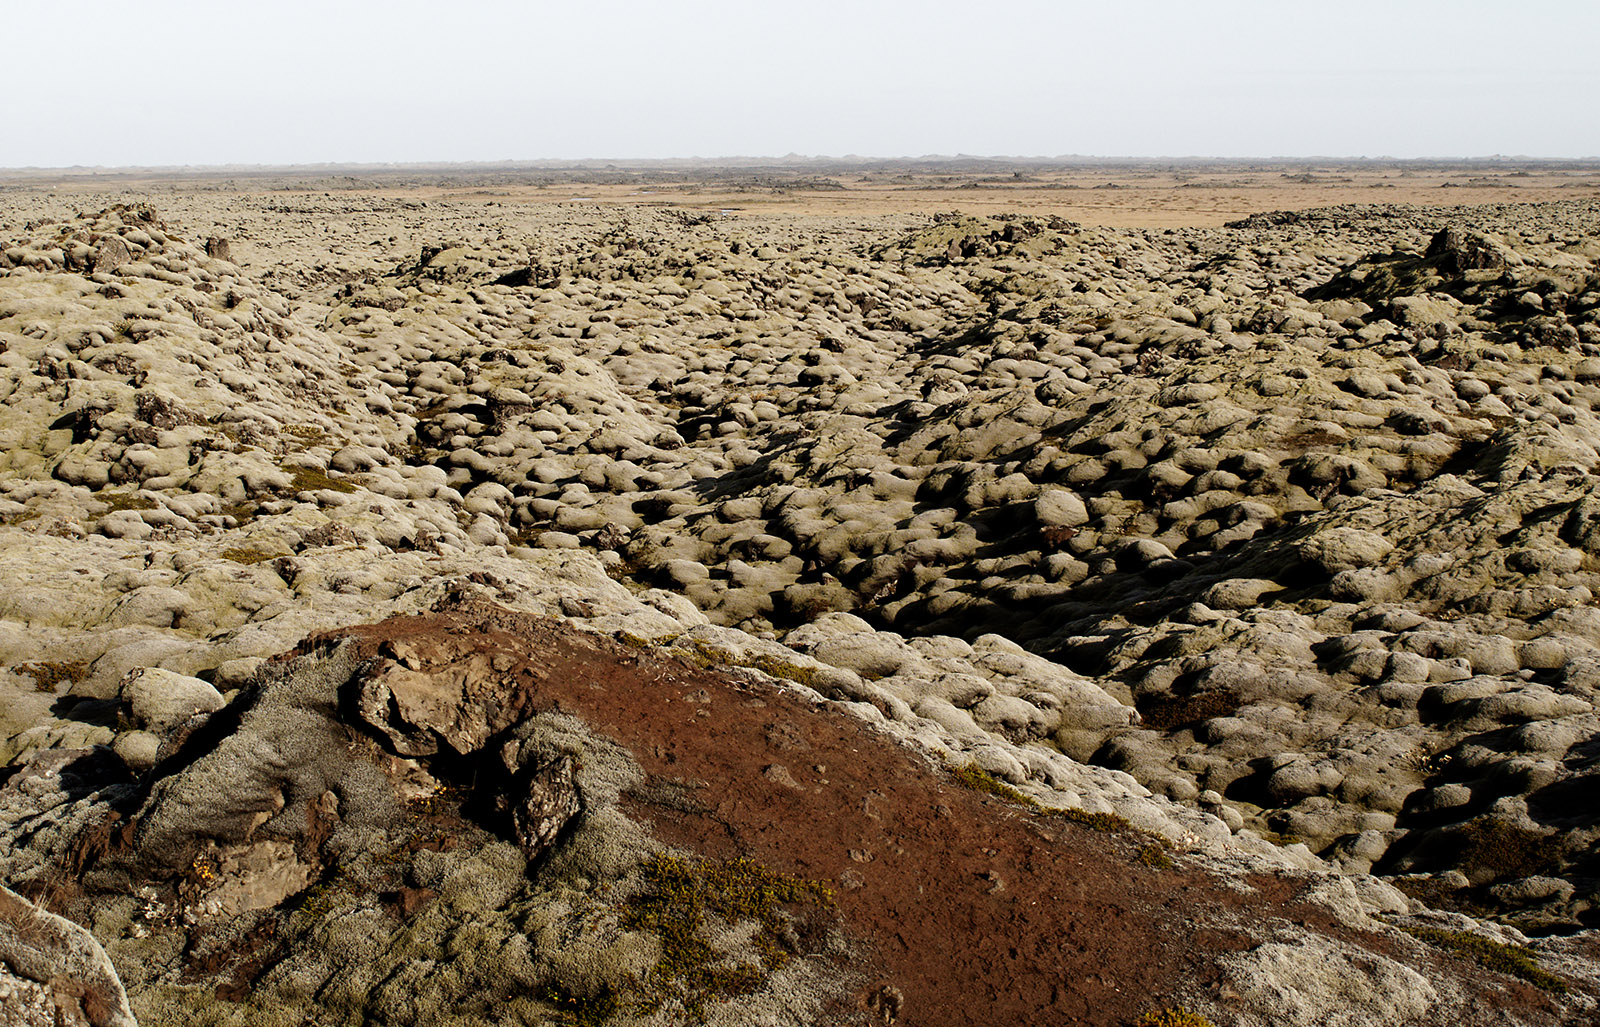 Eldhraun lava field covered by Woolly fringe moss (Racomitrium lanuginosum).  
The lava field was deposited between 1783 to 1784 during one of the greatest eruptions of recorded history. Ash contributed to crop failure in Iceland and throughout Europe and is proposed to have contributed to the French Revolution.